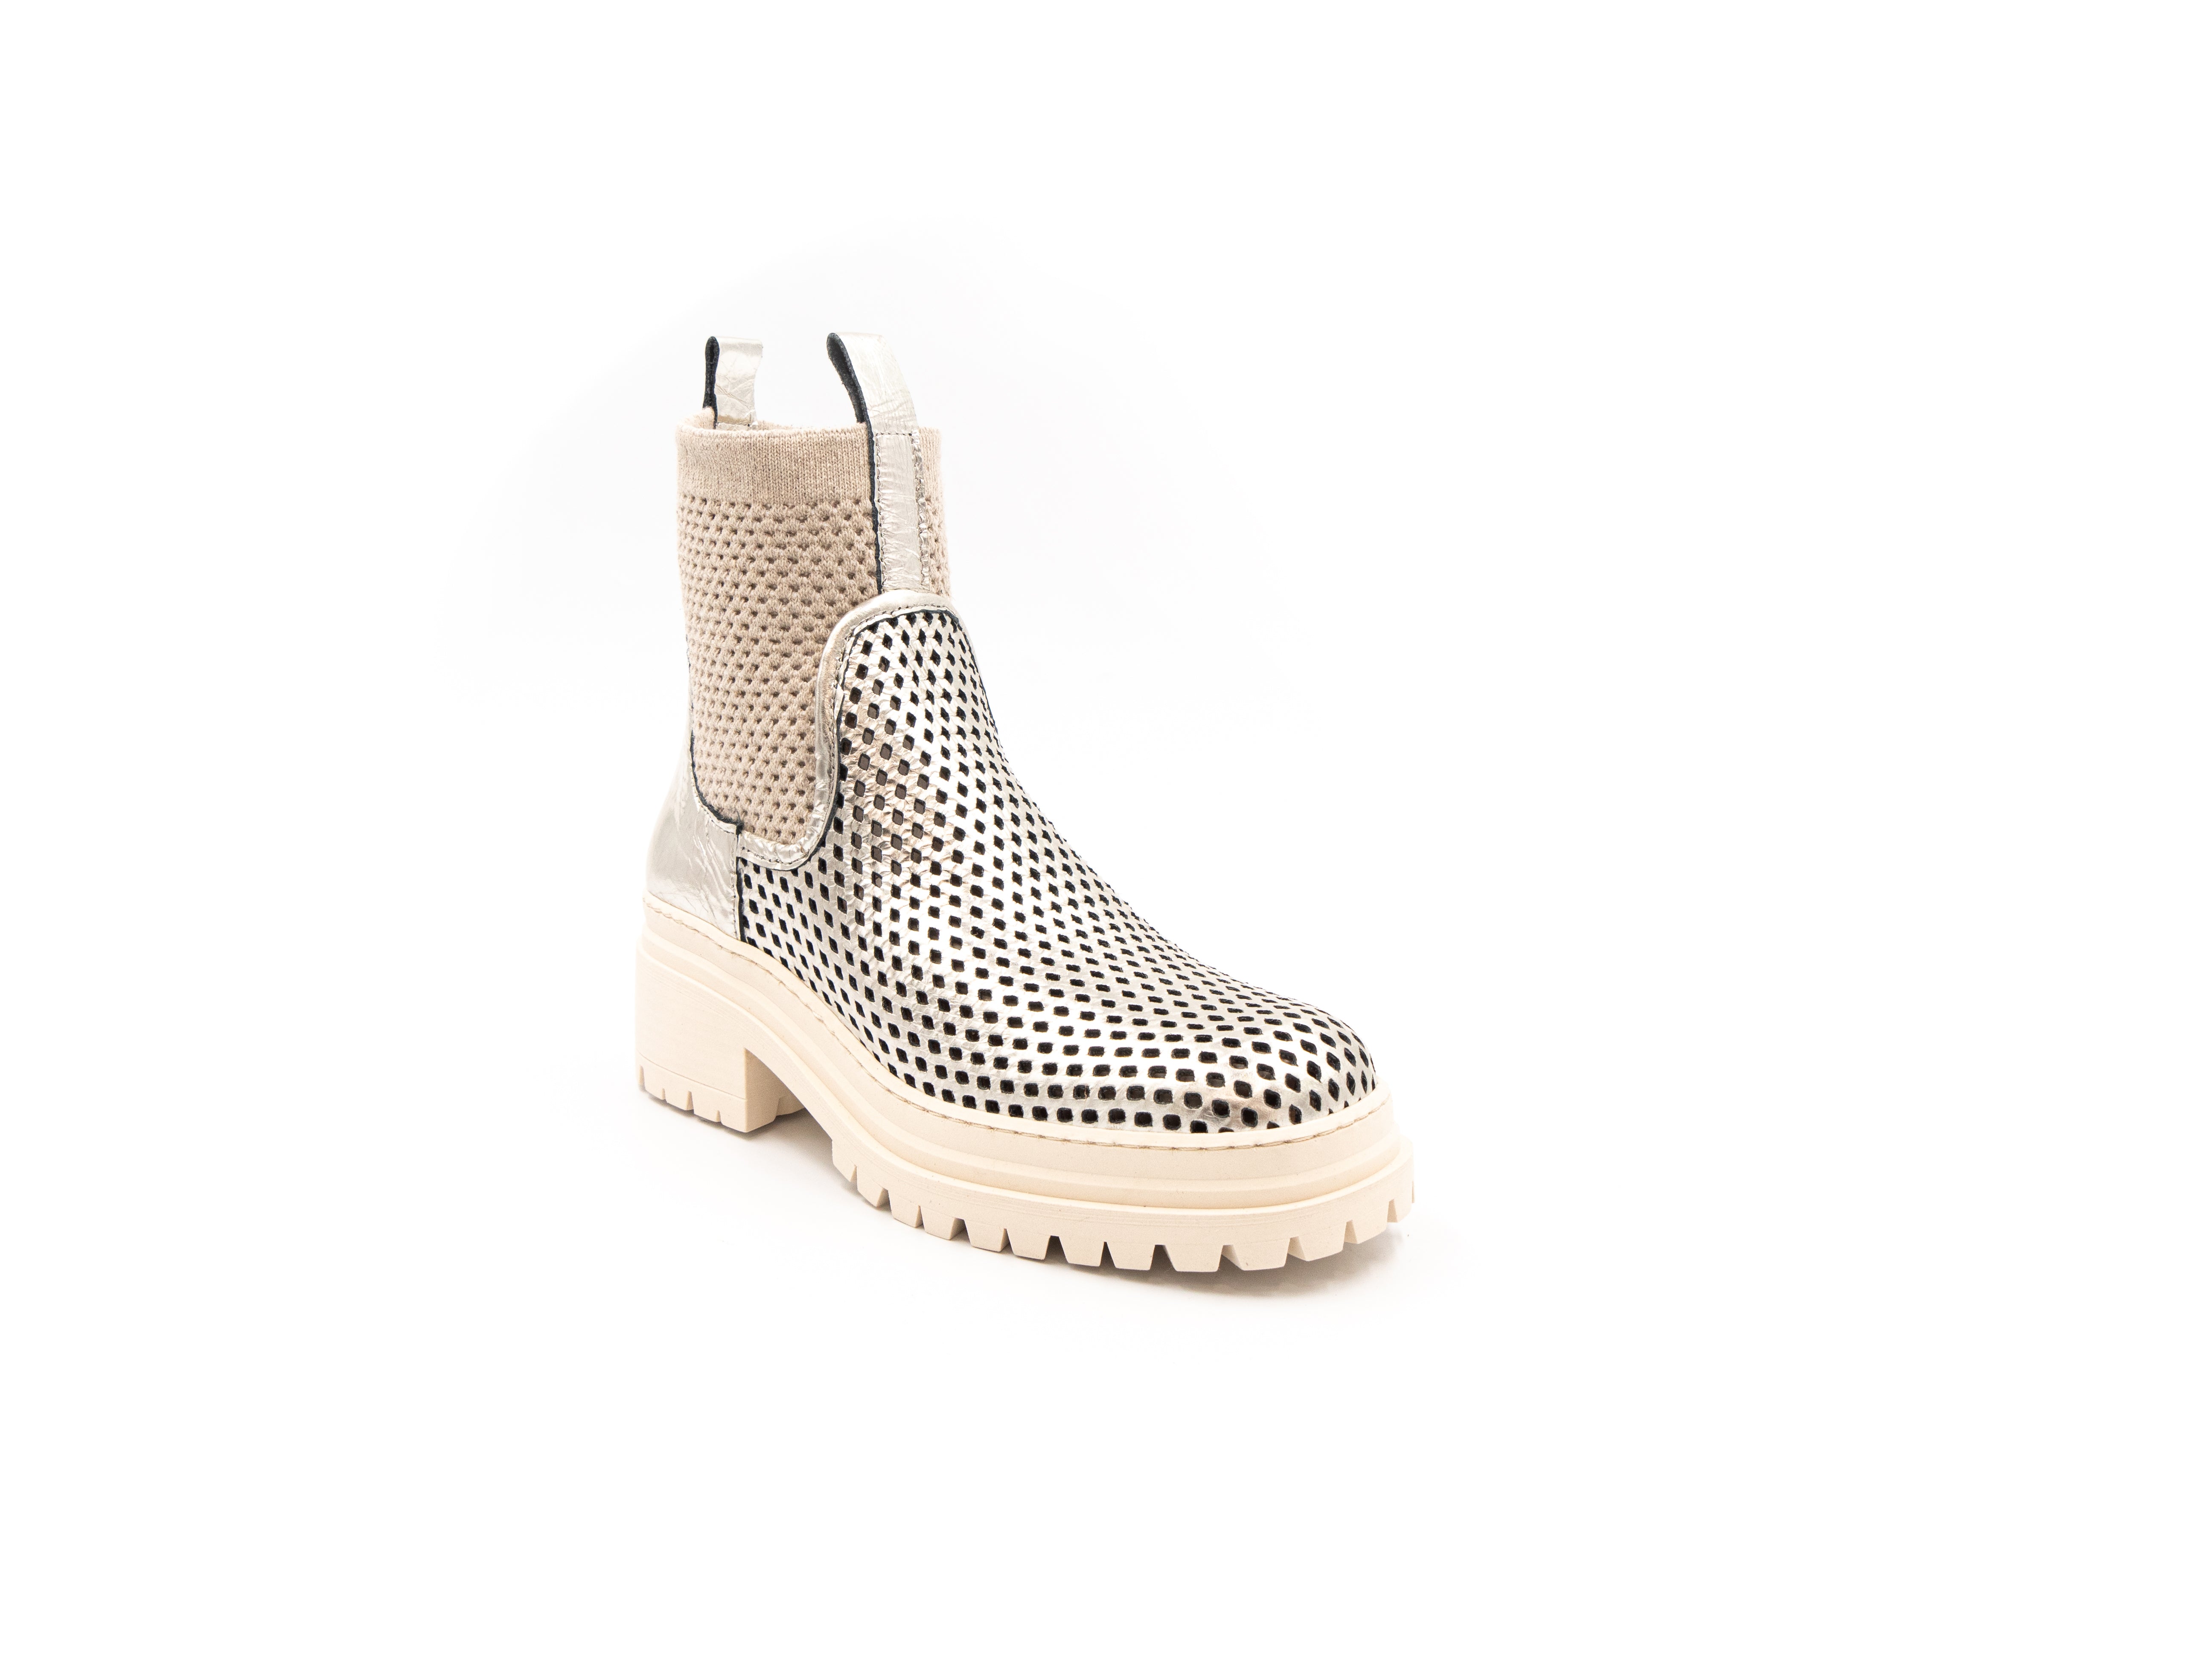 Perforated summer boots.